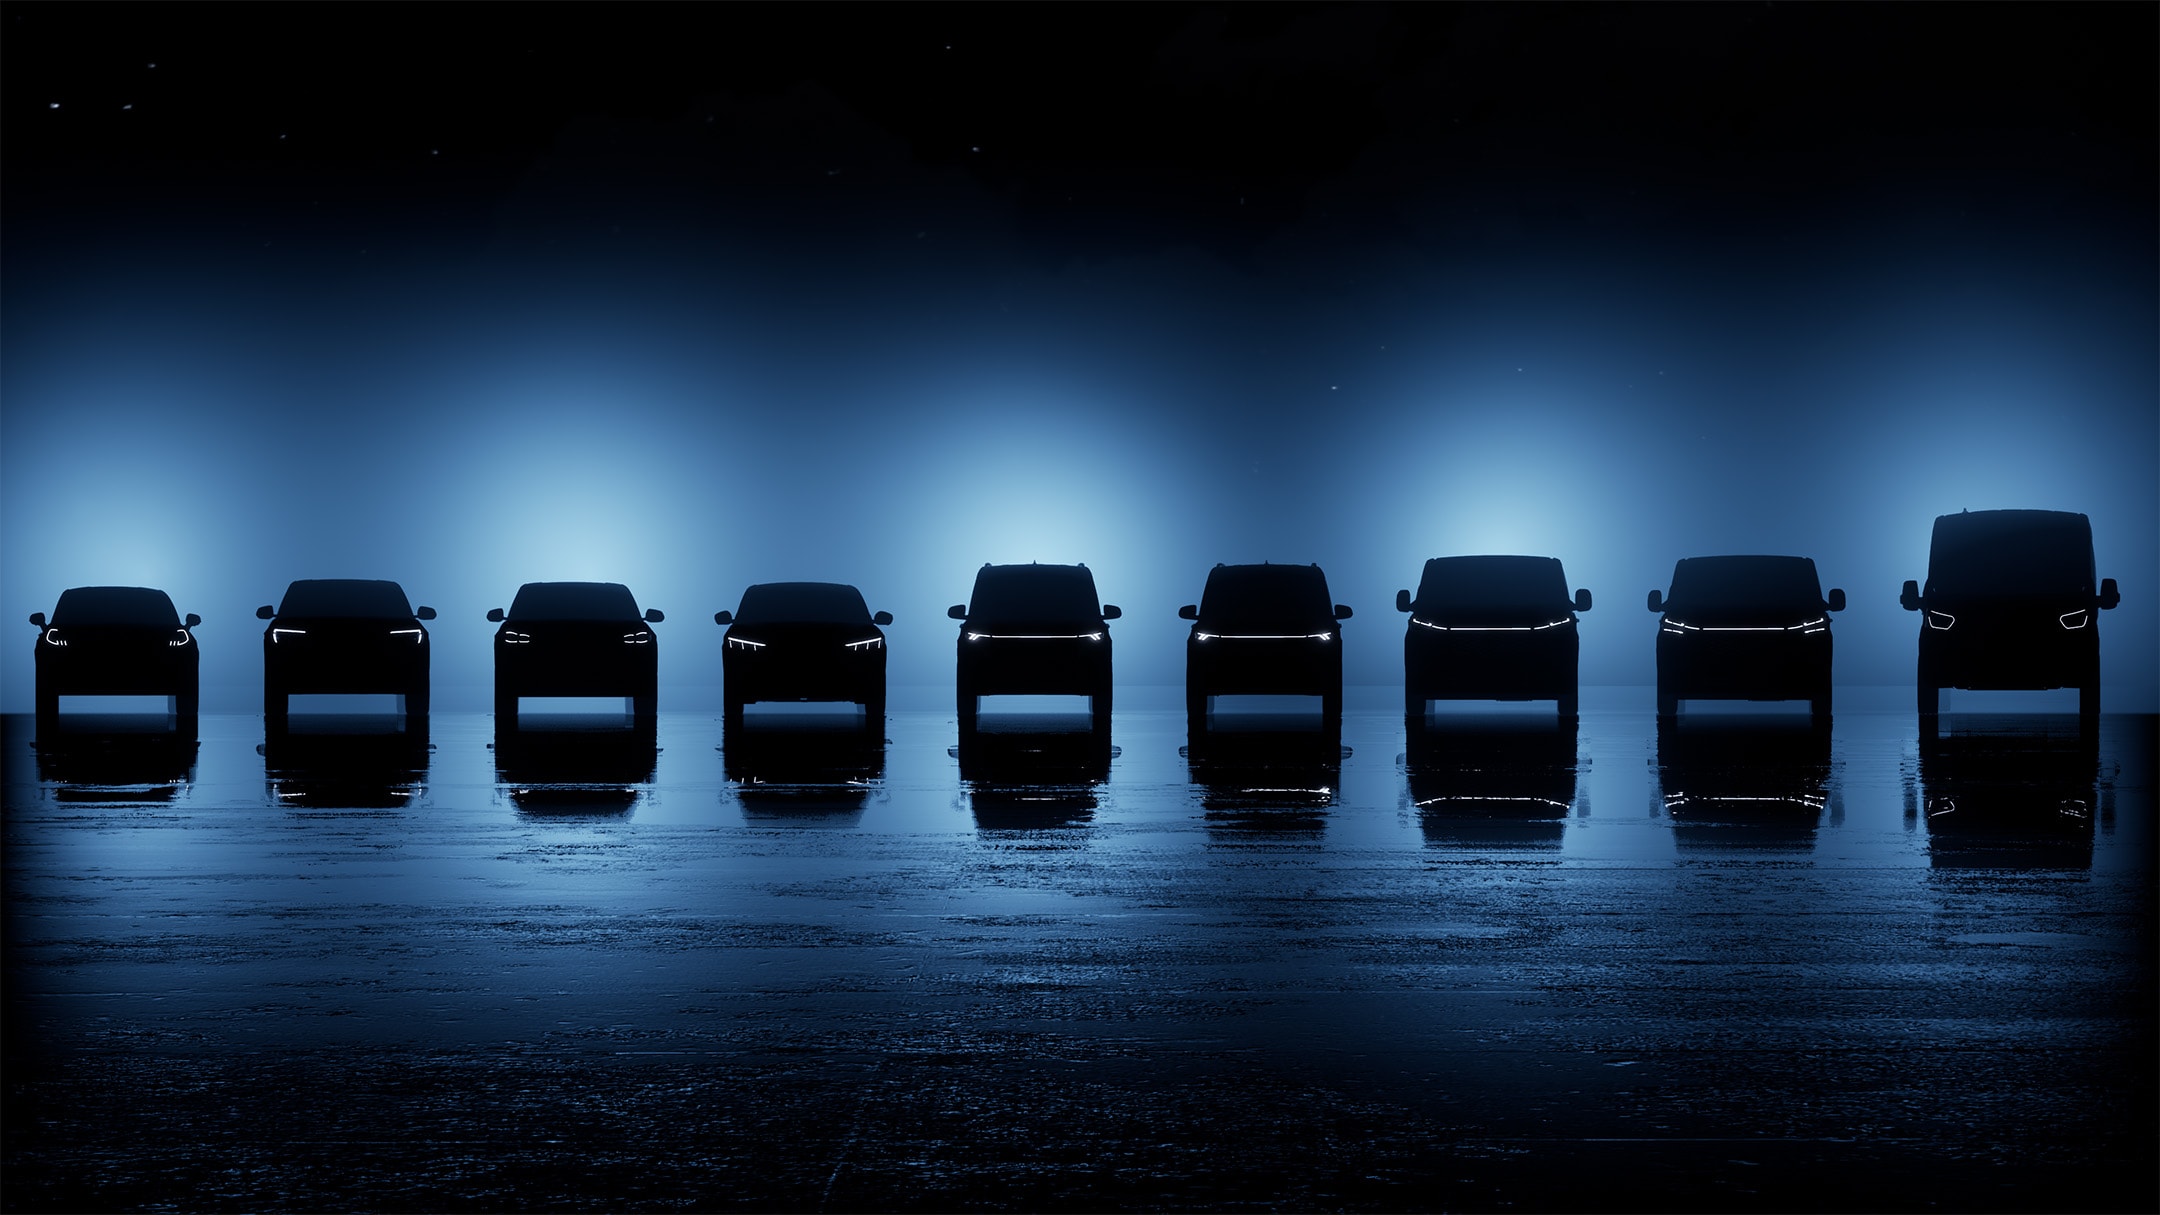 Ford Cars in the dark